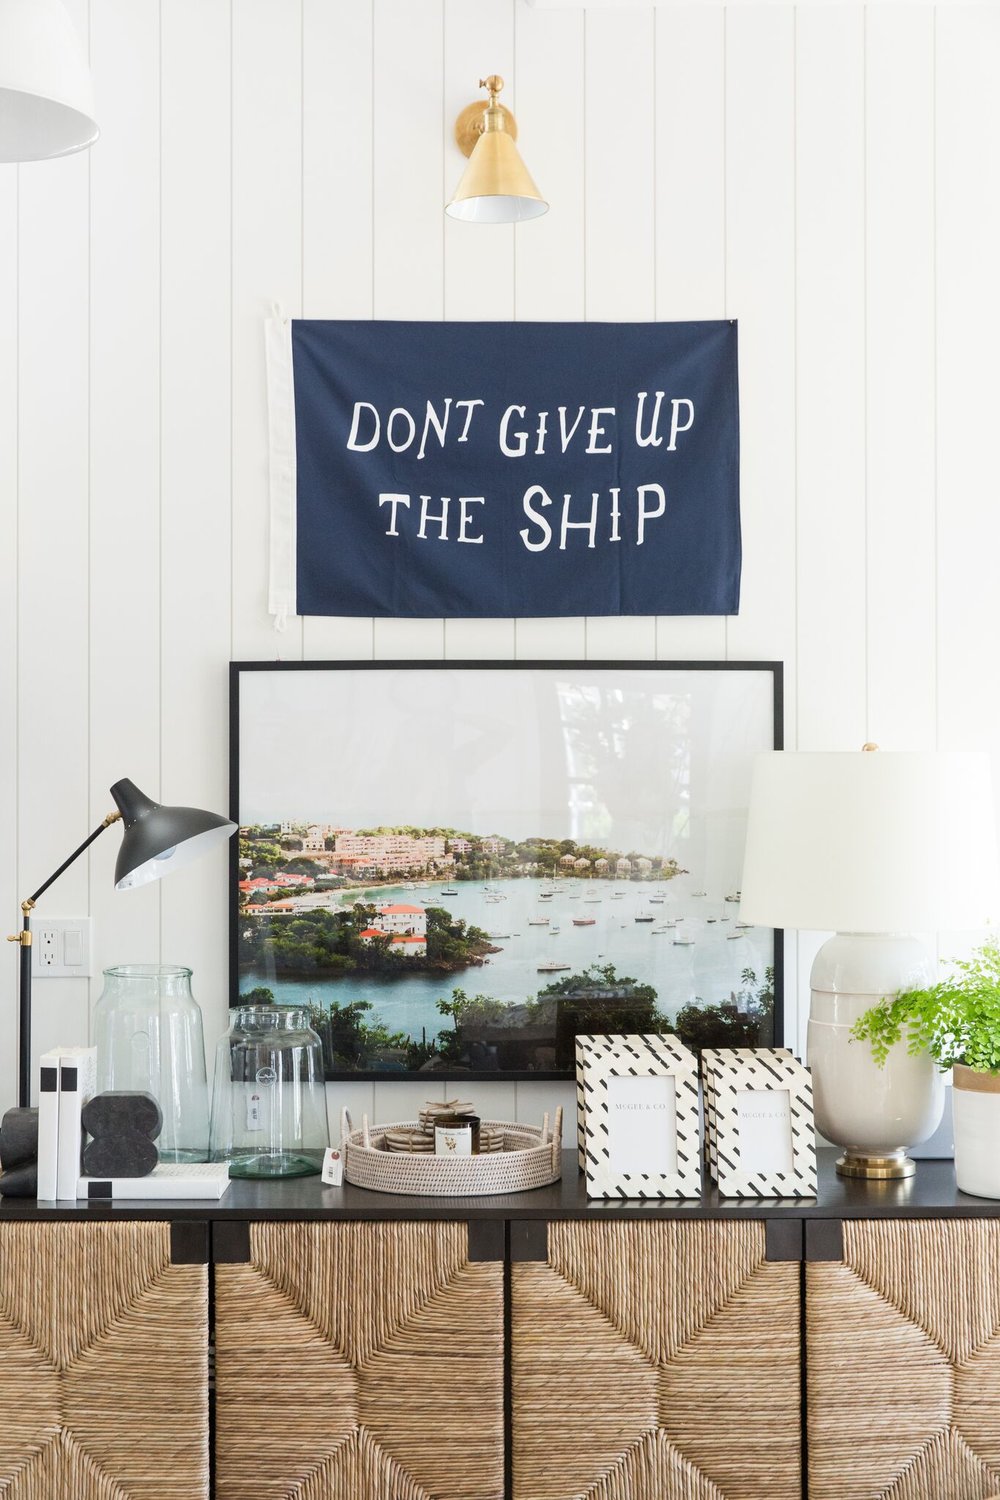 Shop  Don't Give Up The Ship ,&nbsp; Charlton Table Lamp ,  French Mason Jars ,  Black Label Books ,  Socrates Bookends ,  Light Rattan Round Trays ,  Murchison-Home Candle ,  Tile Frame ,  Newcomb Table Lamp ,&nbsp; St John ,&nbsp; Console